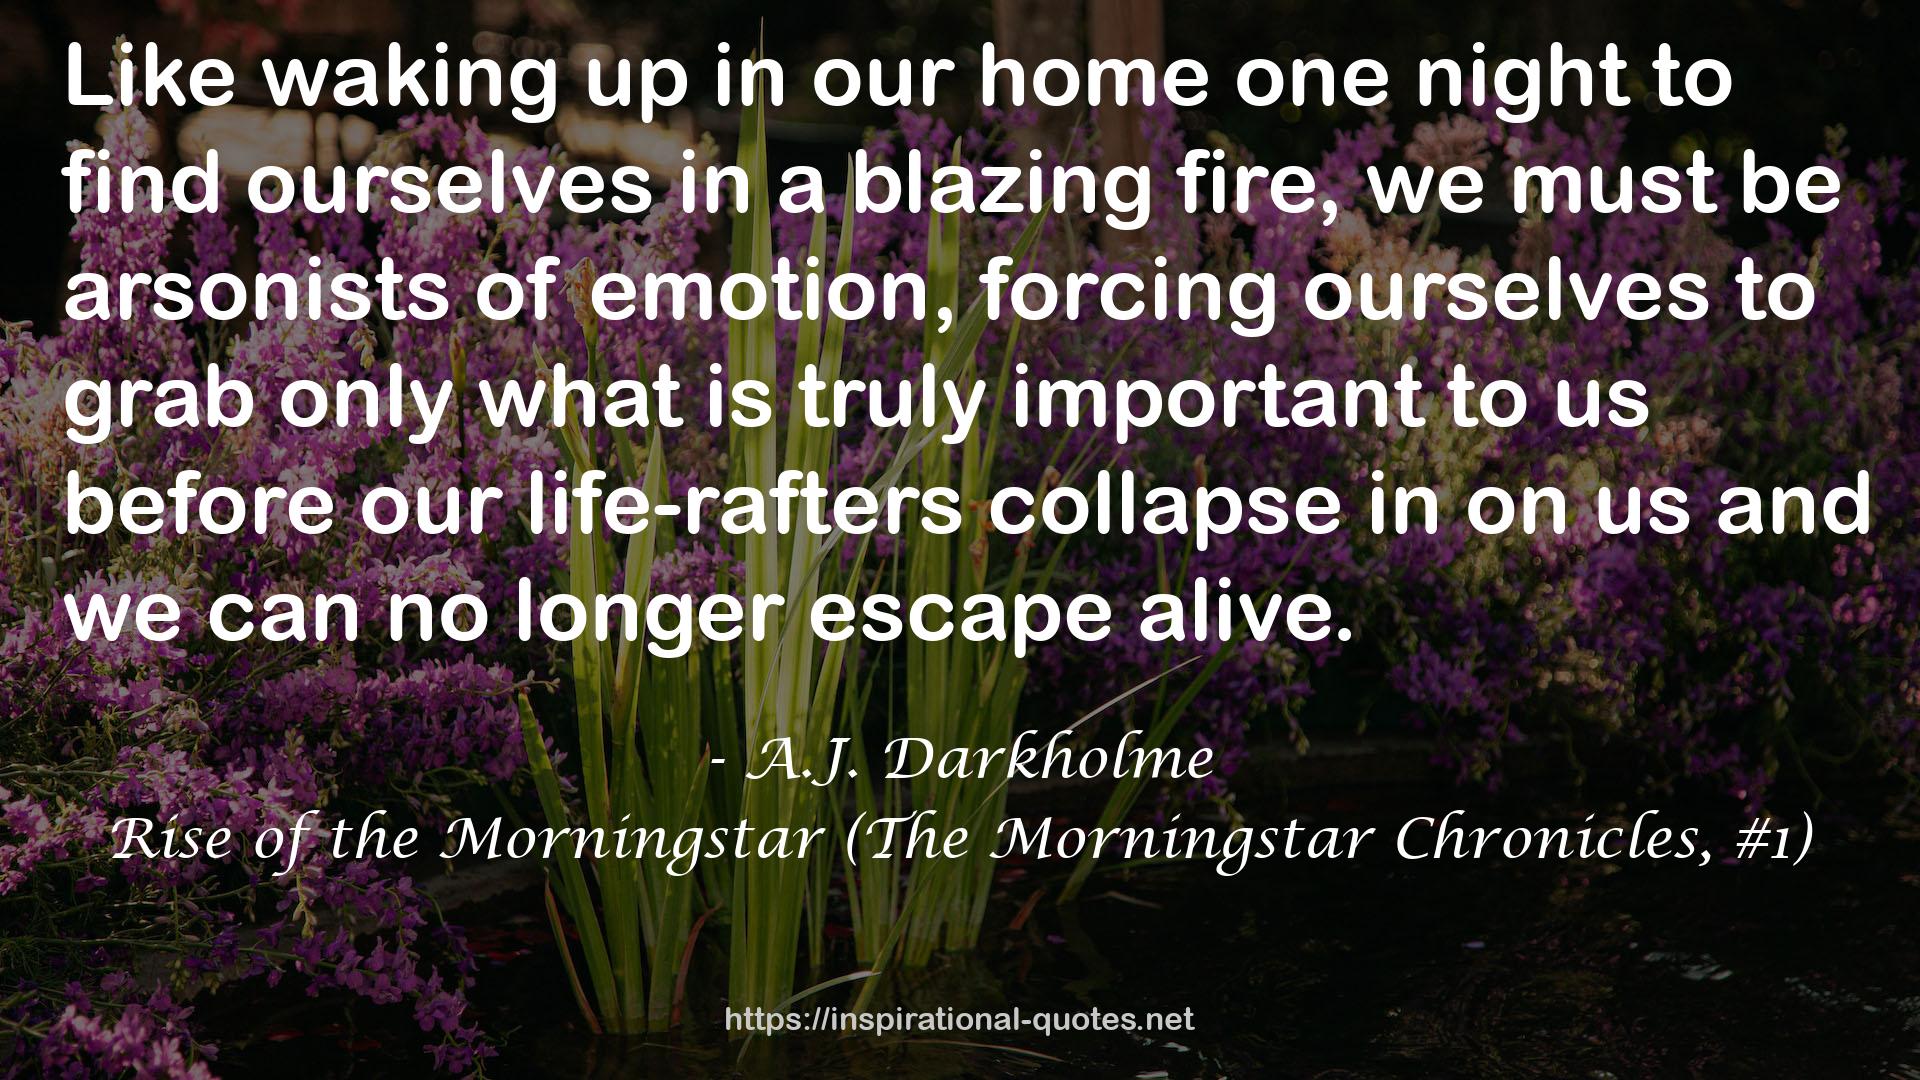 Rise of the Morningstar (The Morningstar Chronicles, #1) QUOTES